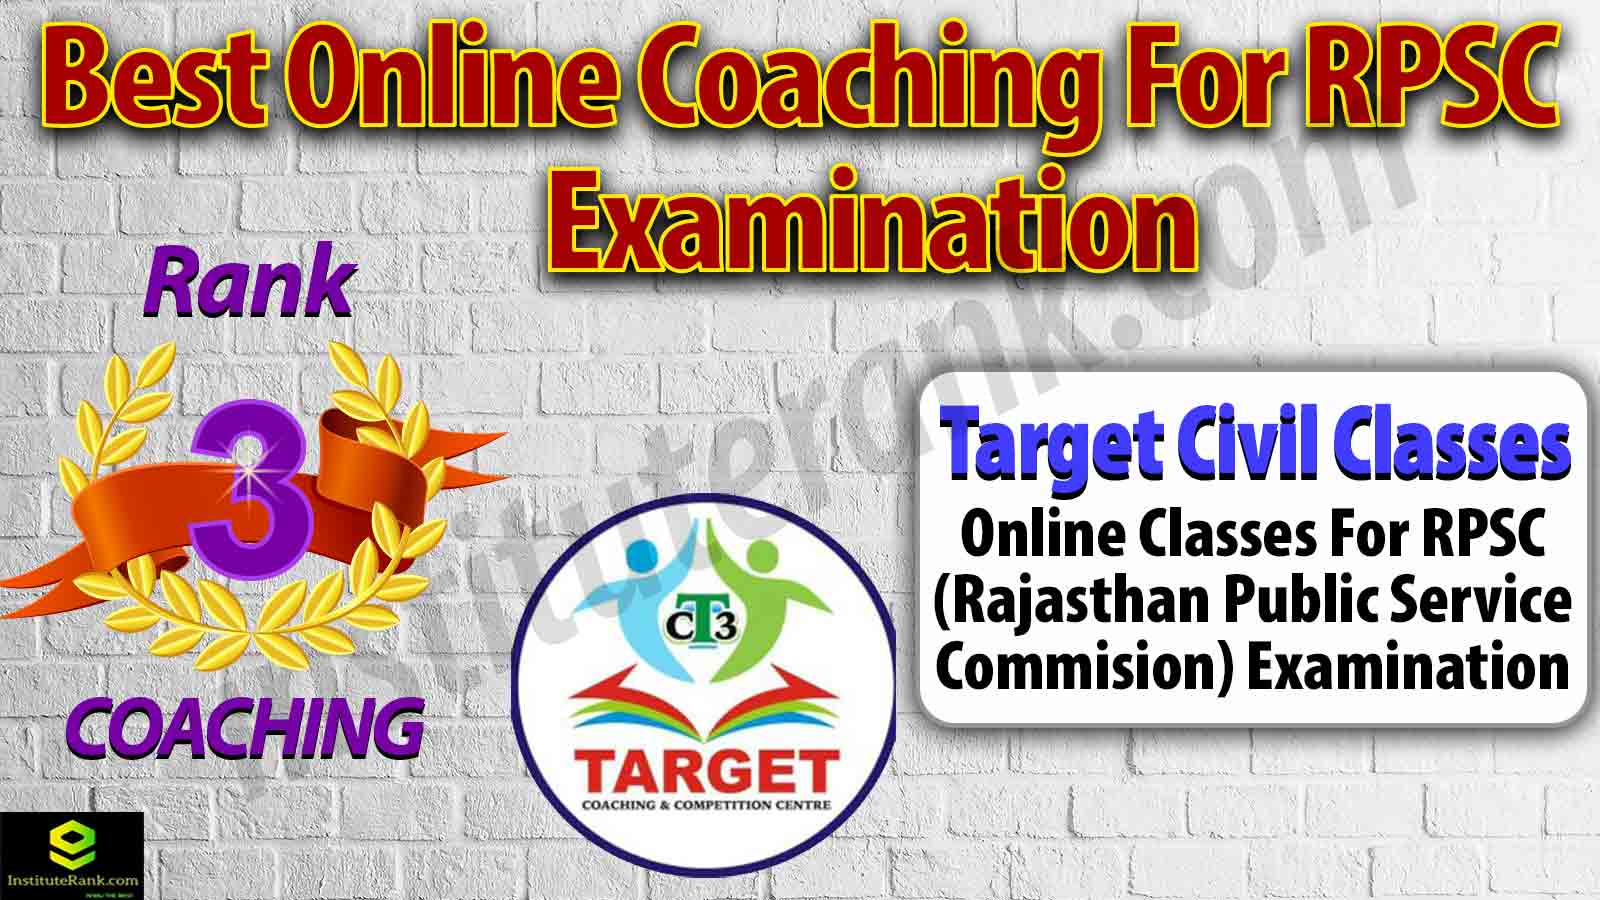 Top Online Coaching Centre for RPSC Examination